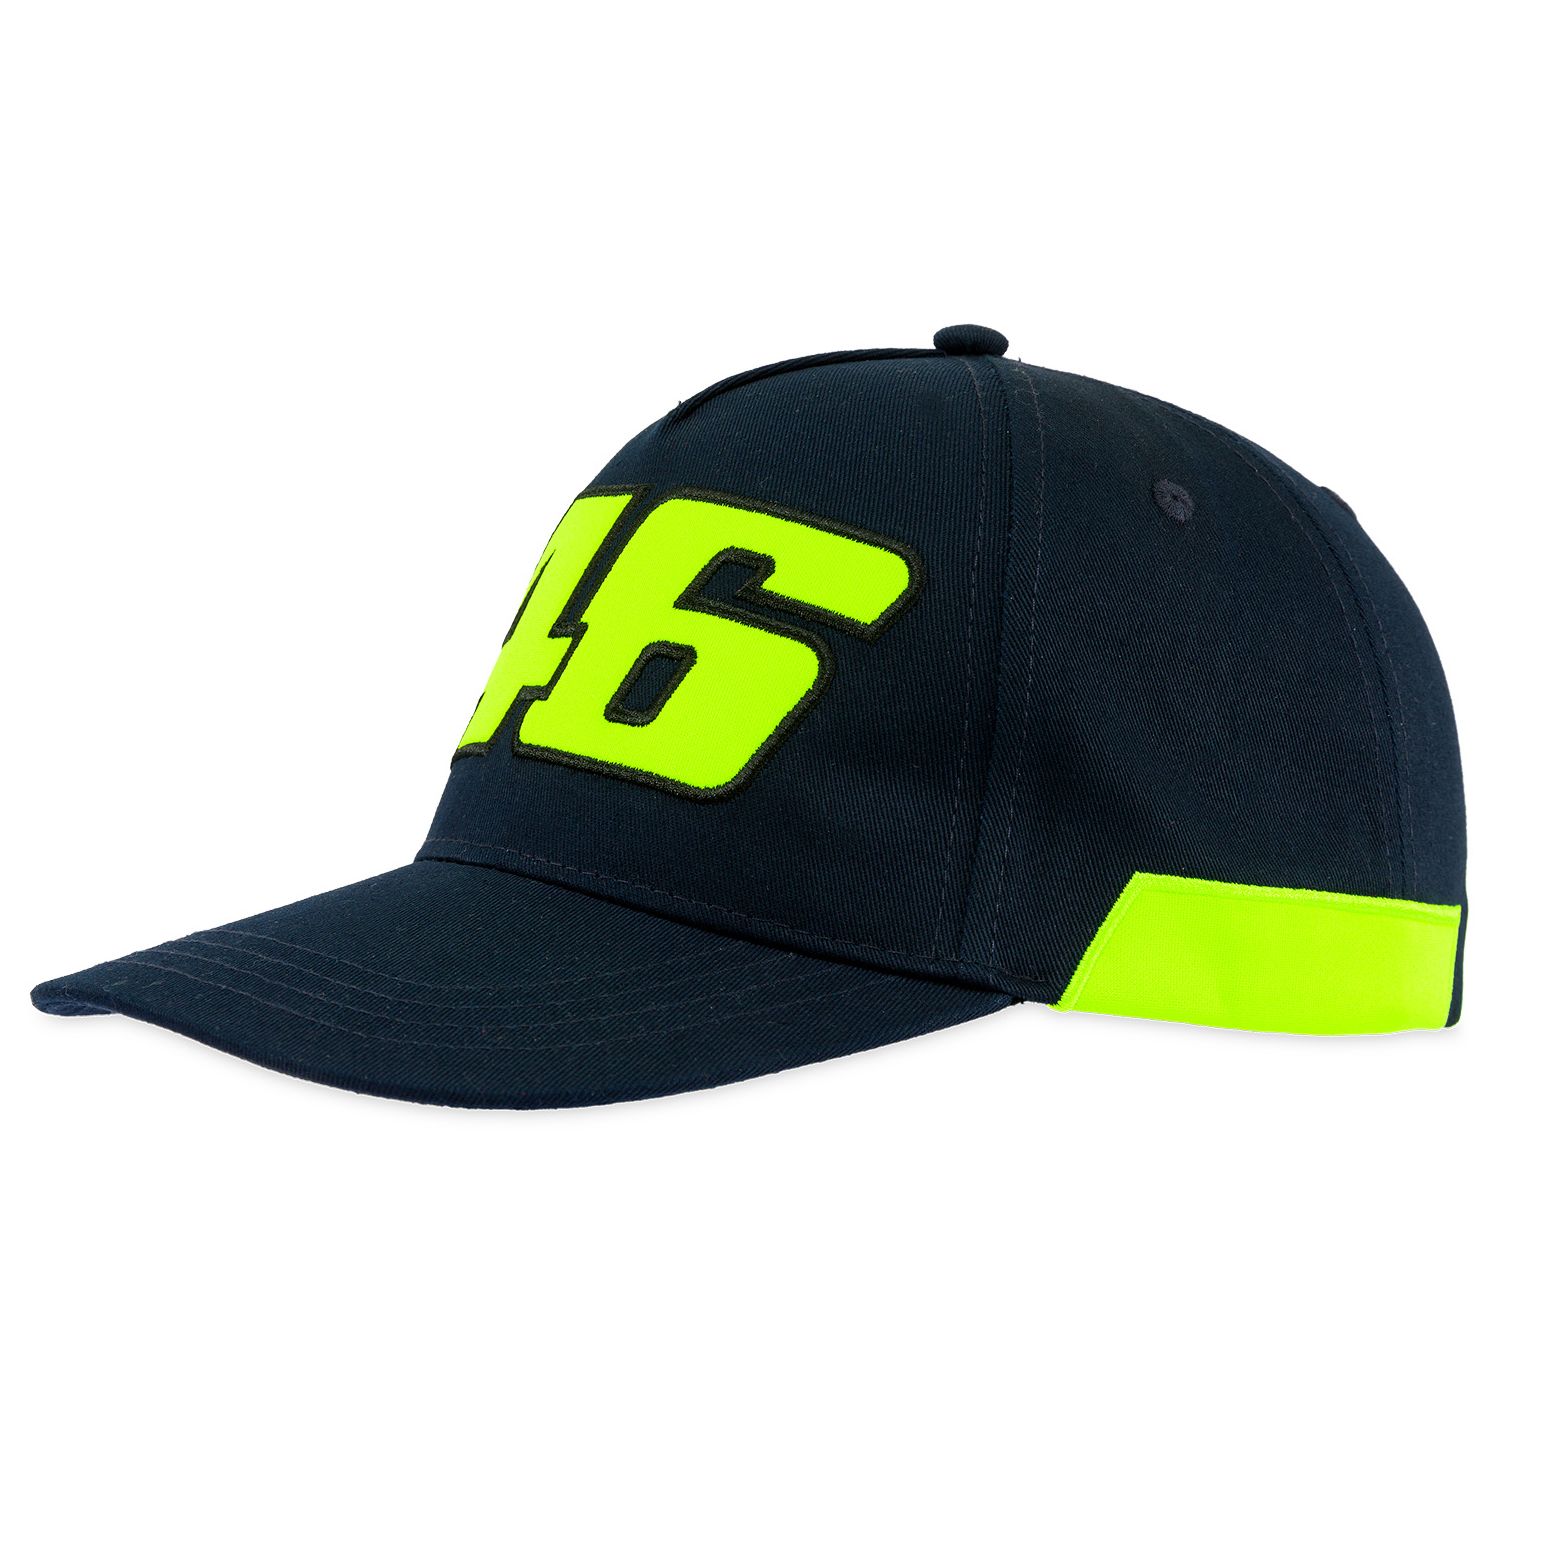 Image of Casquette VR 46 VR46 - SPORTSWEAR HOMME BLUE